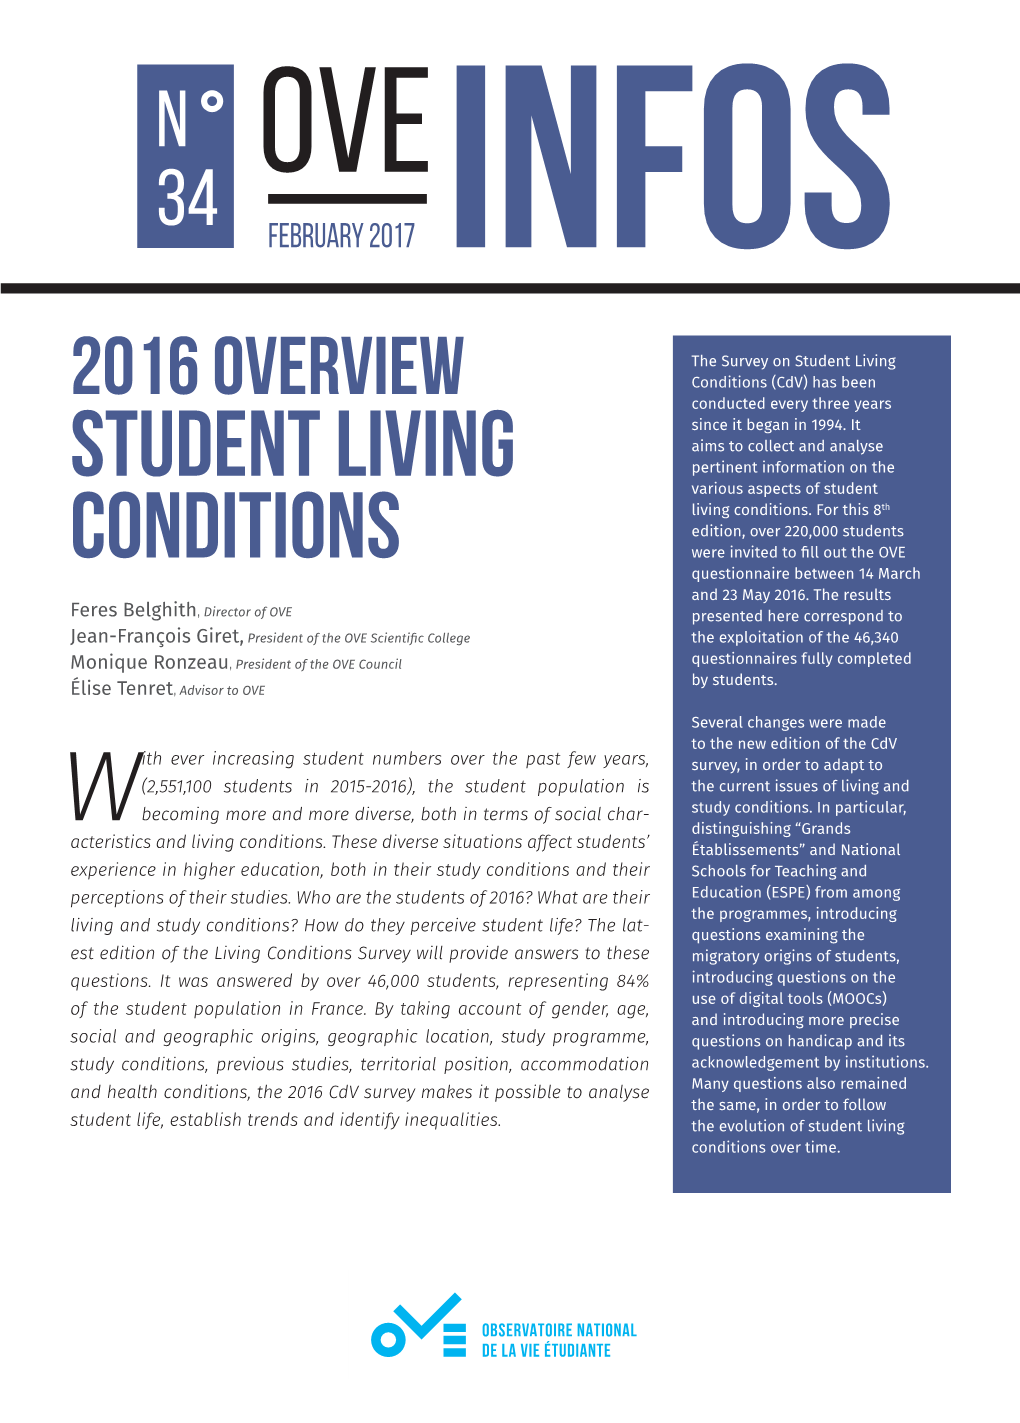 Student Living Conditions